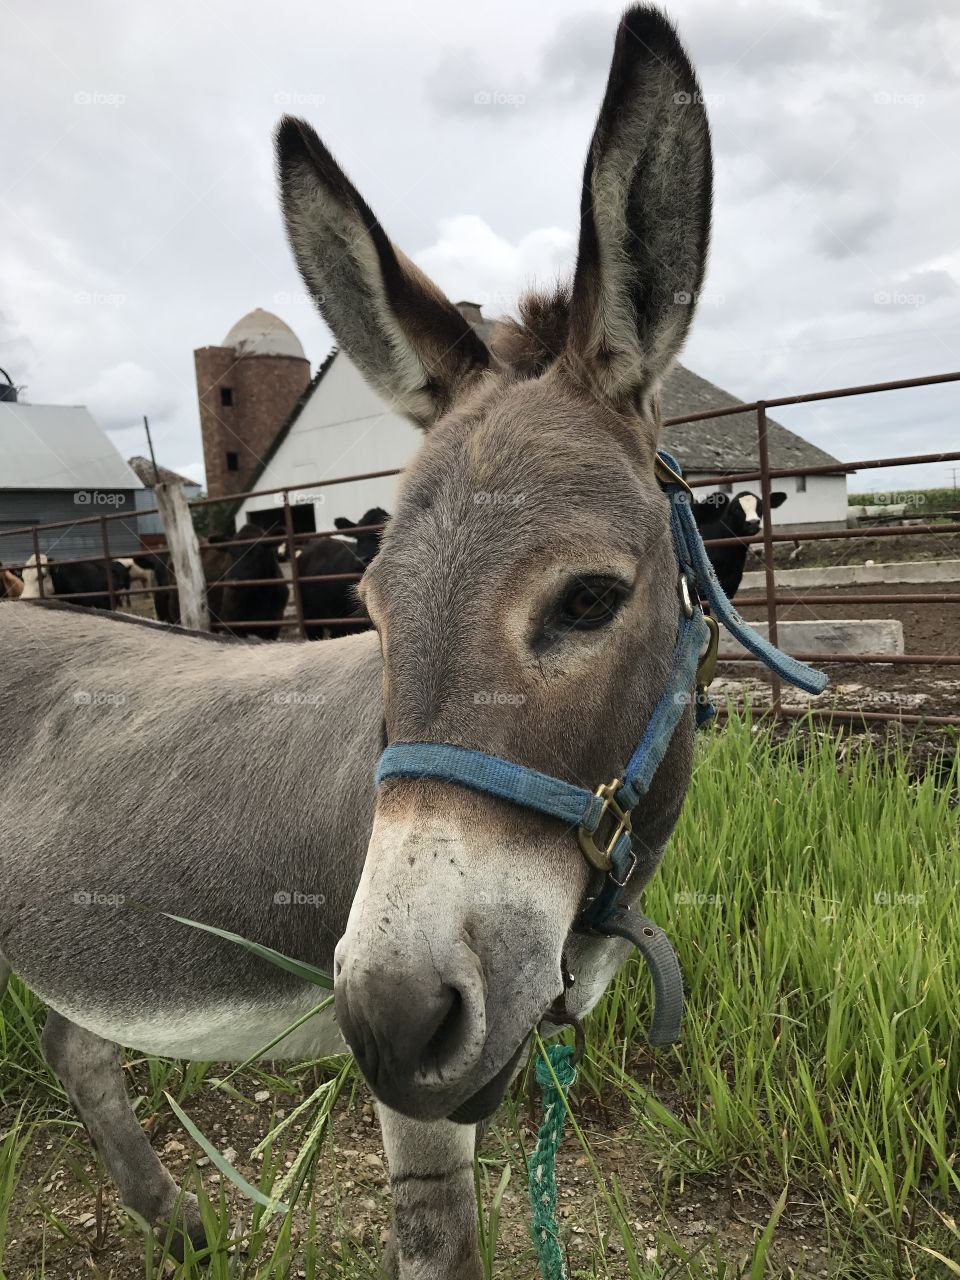 Our donkey out on a walk!